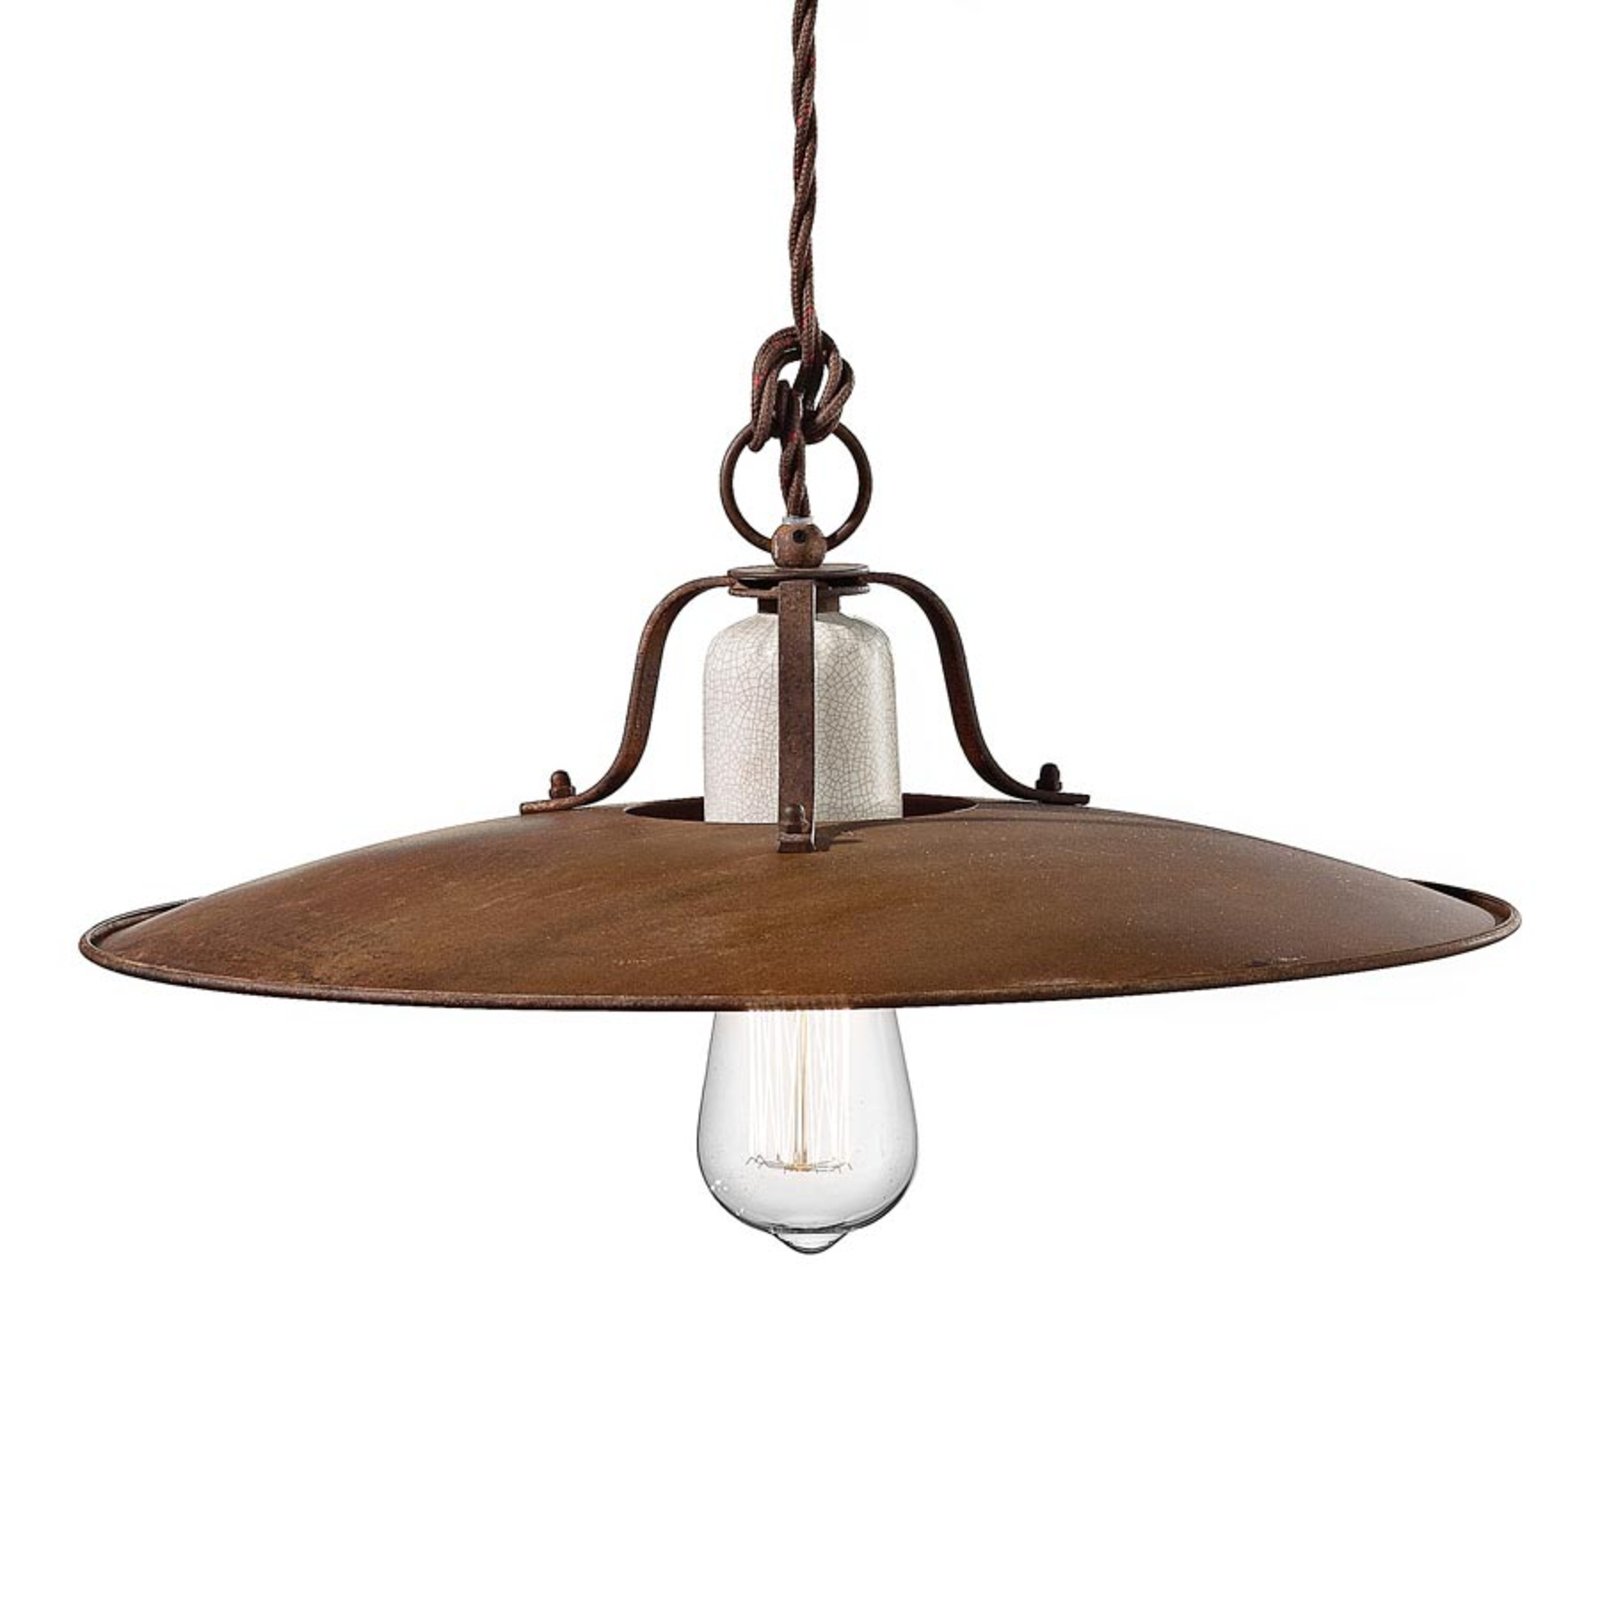 Riccardo pendant light with practical rise and fall mechanism